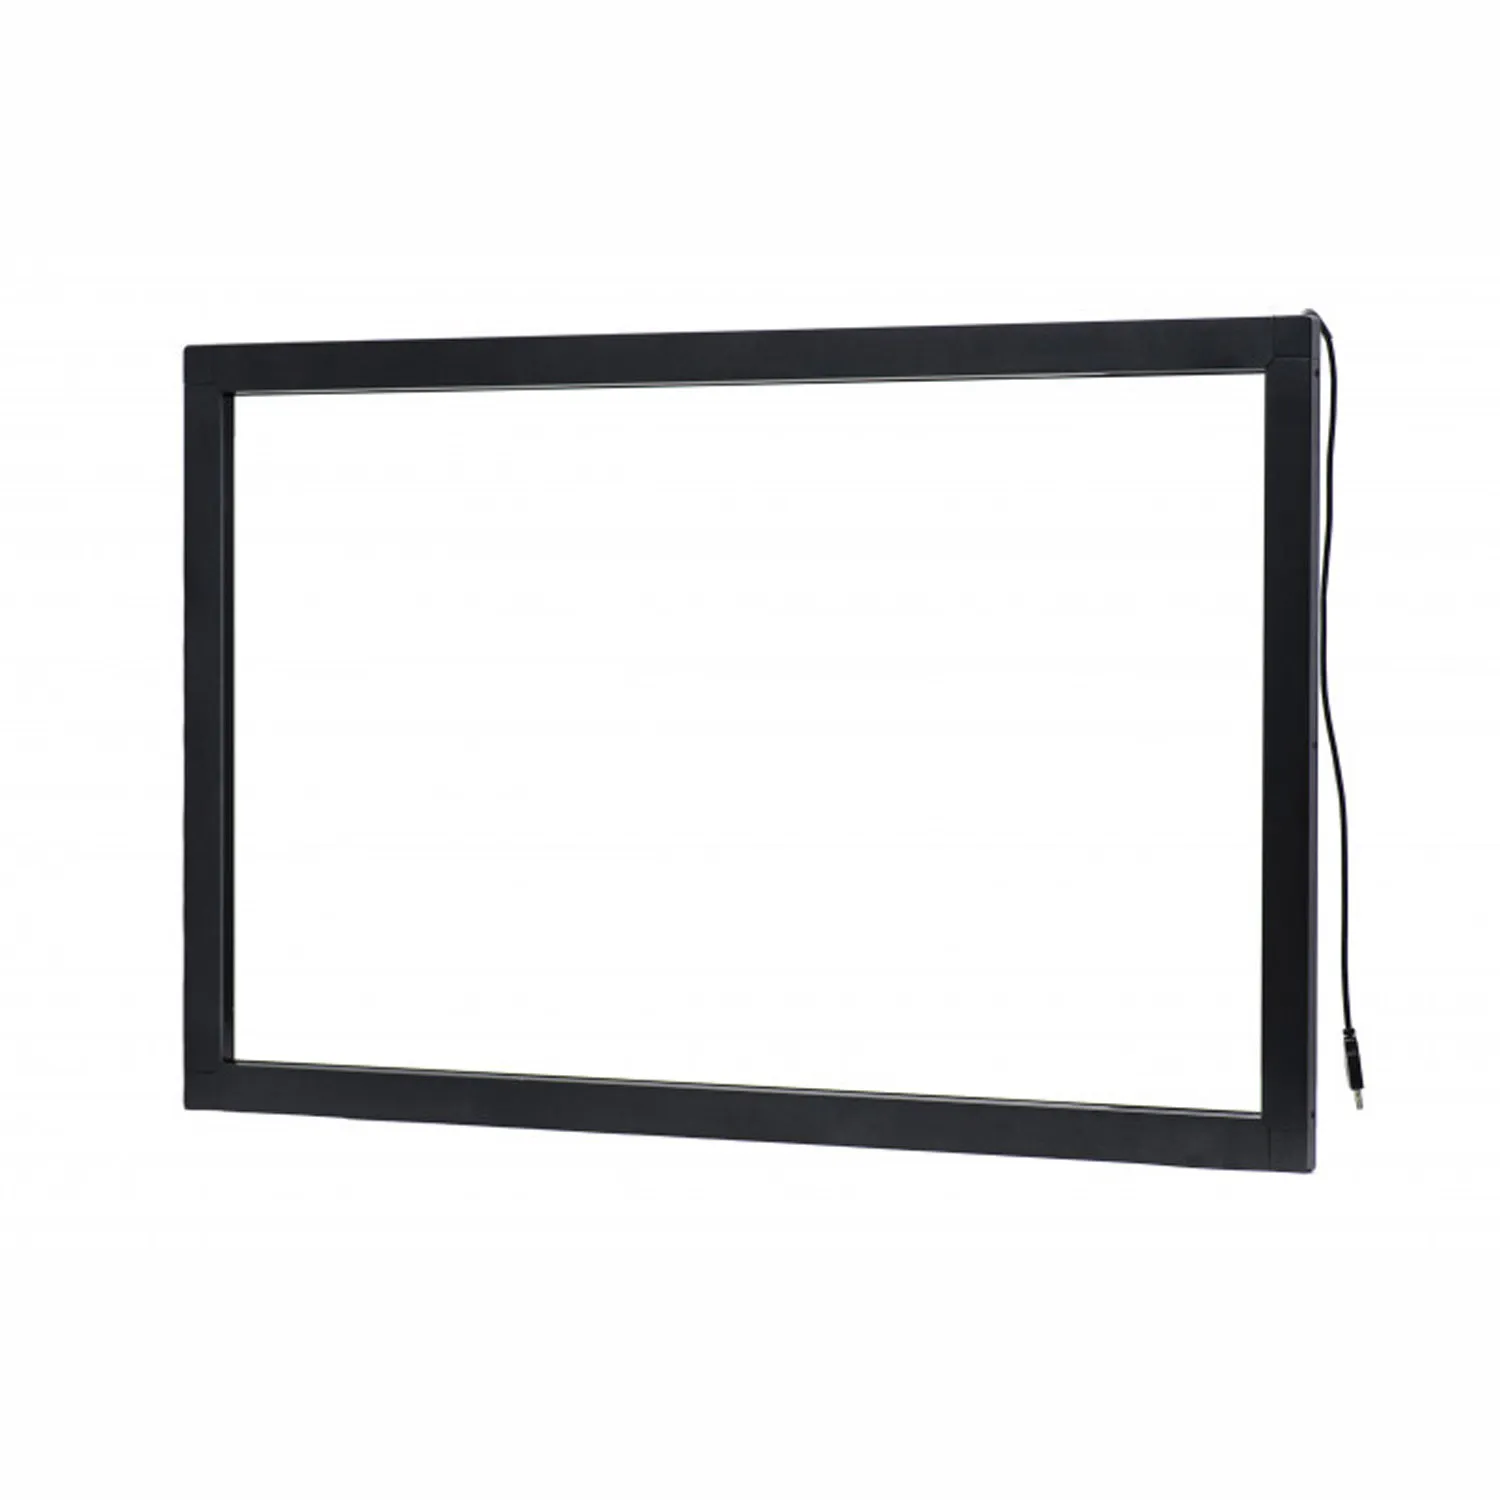 INFRARED TOUCH FRAME 32" KP-320-IP2S0U1